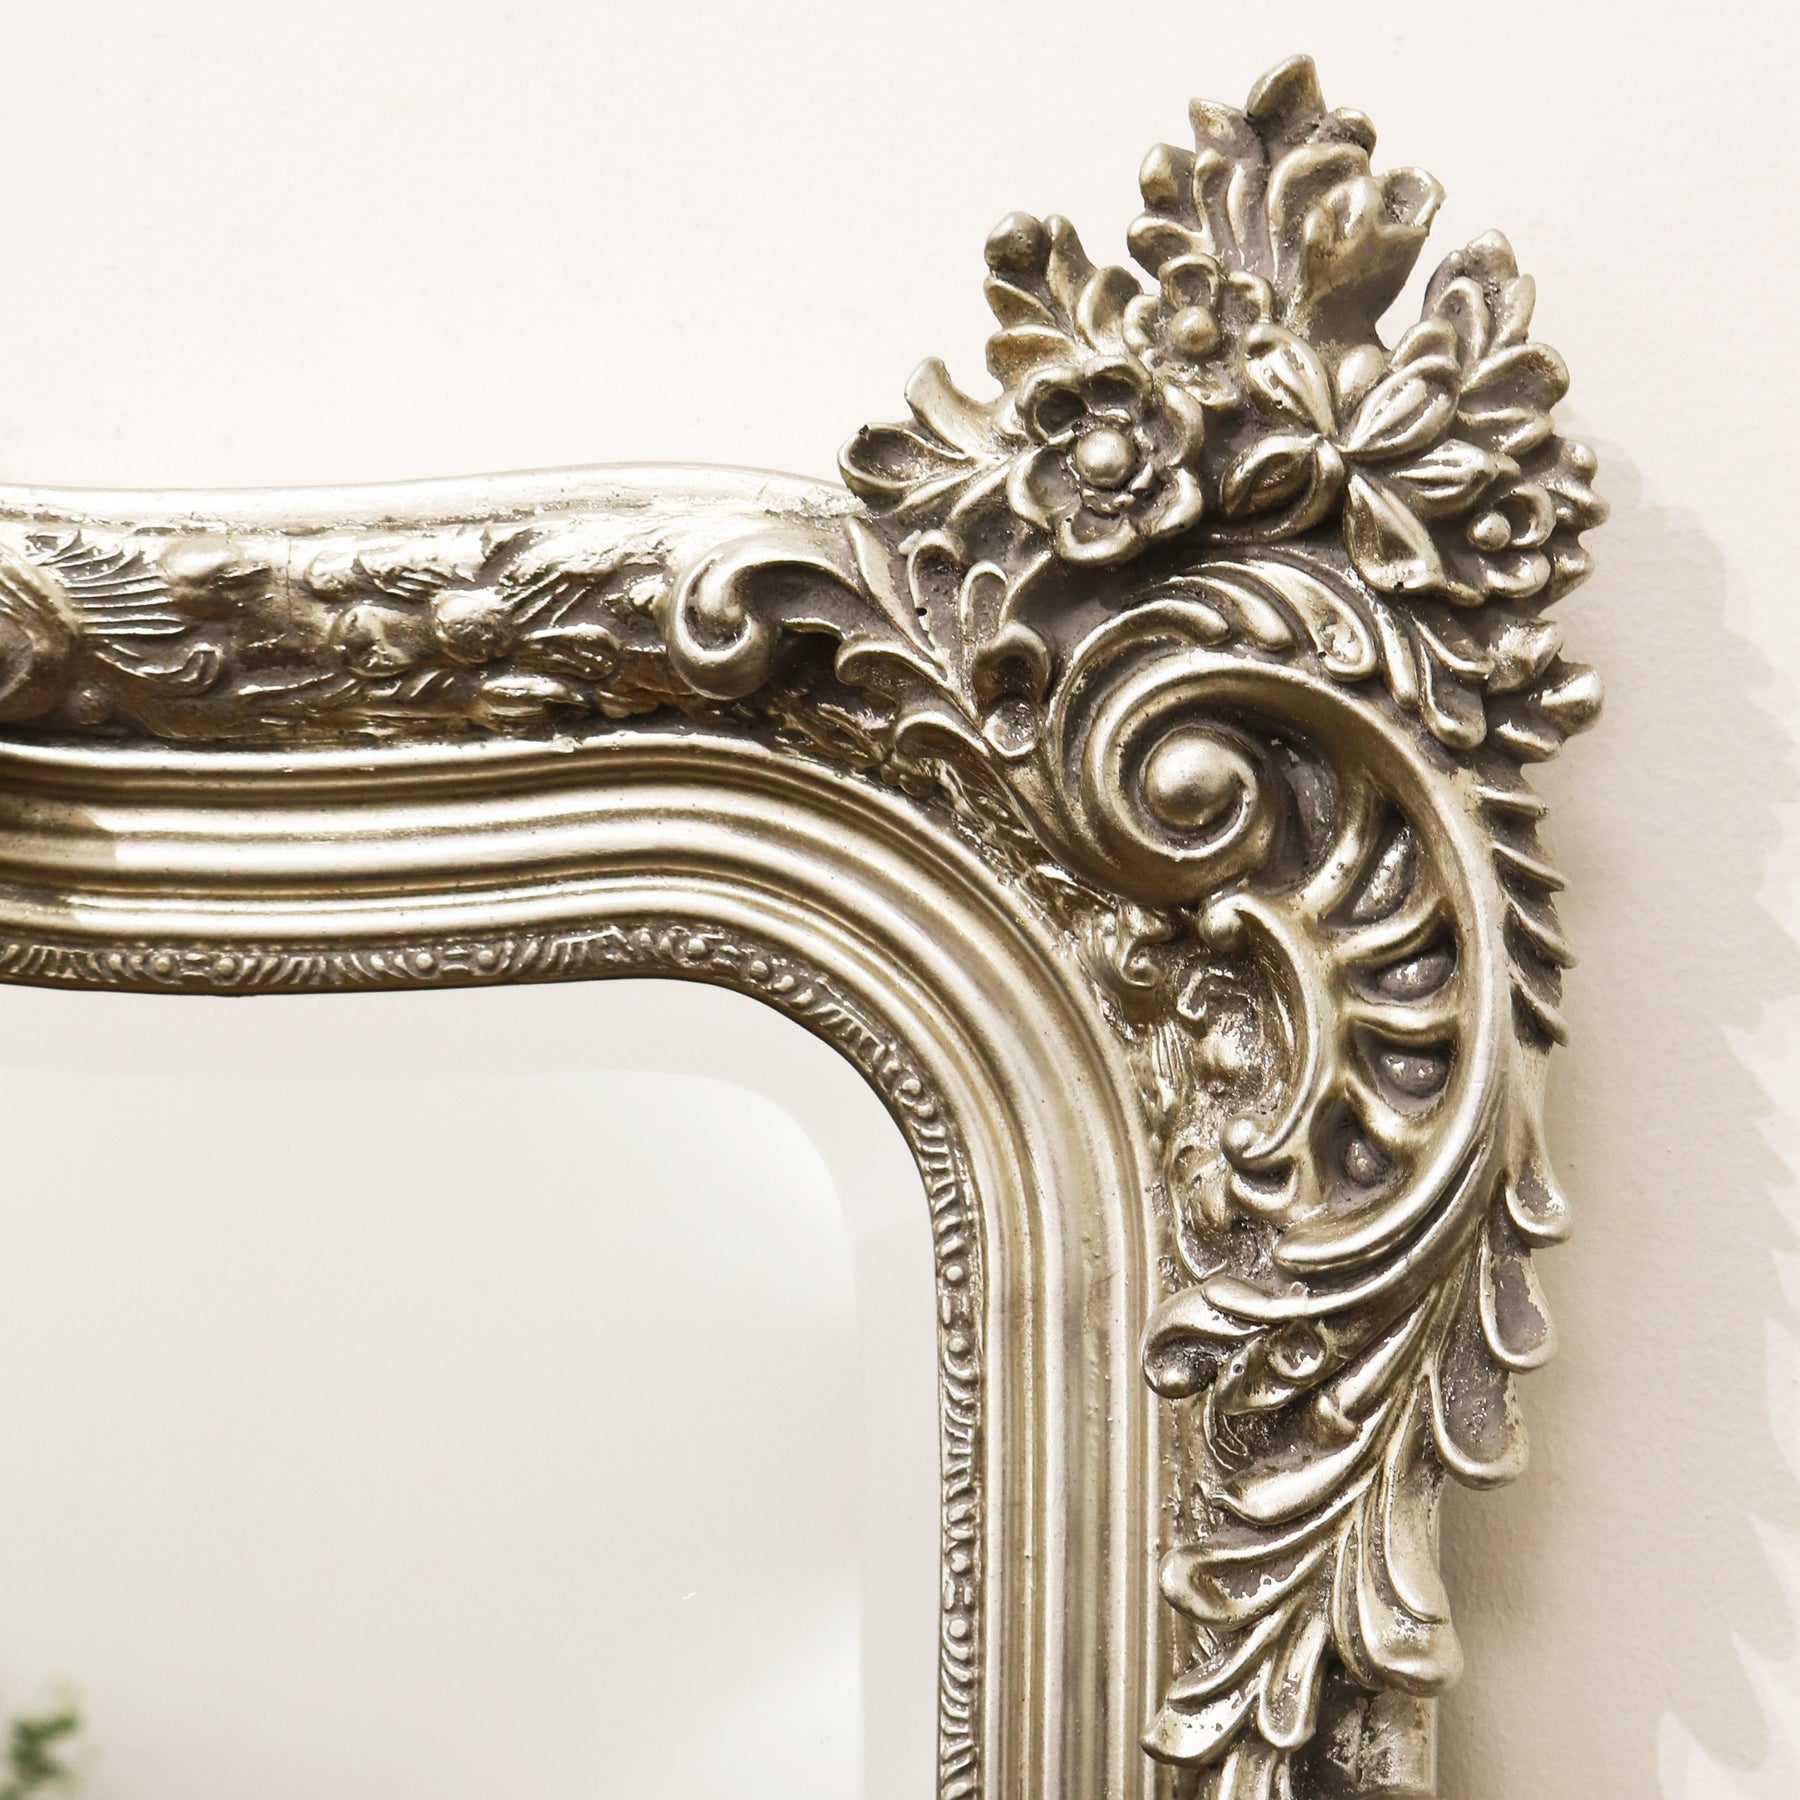 Silver Arched Ornate Overmantle Wall Mirror alternate shot of corner